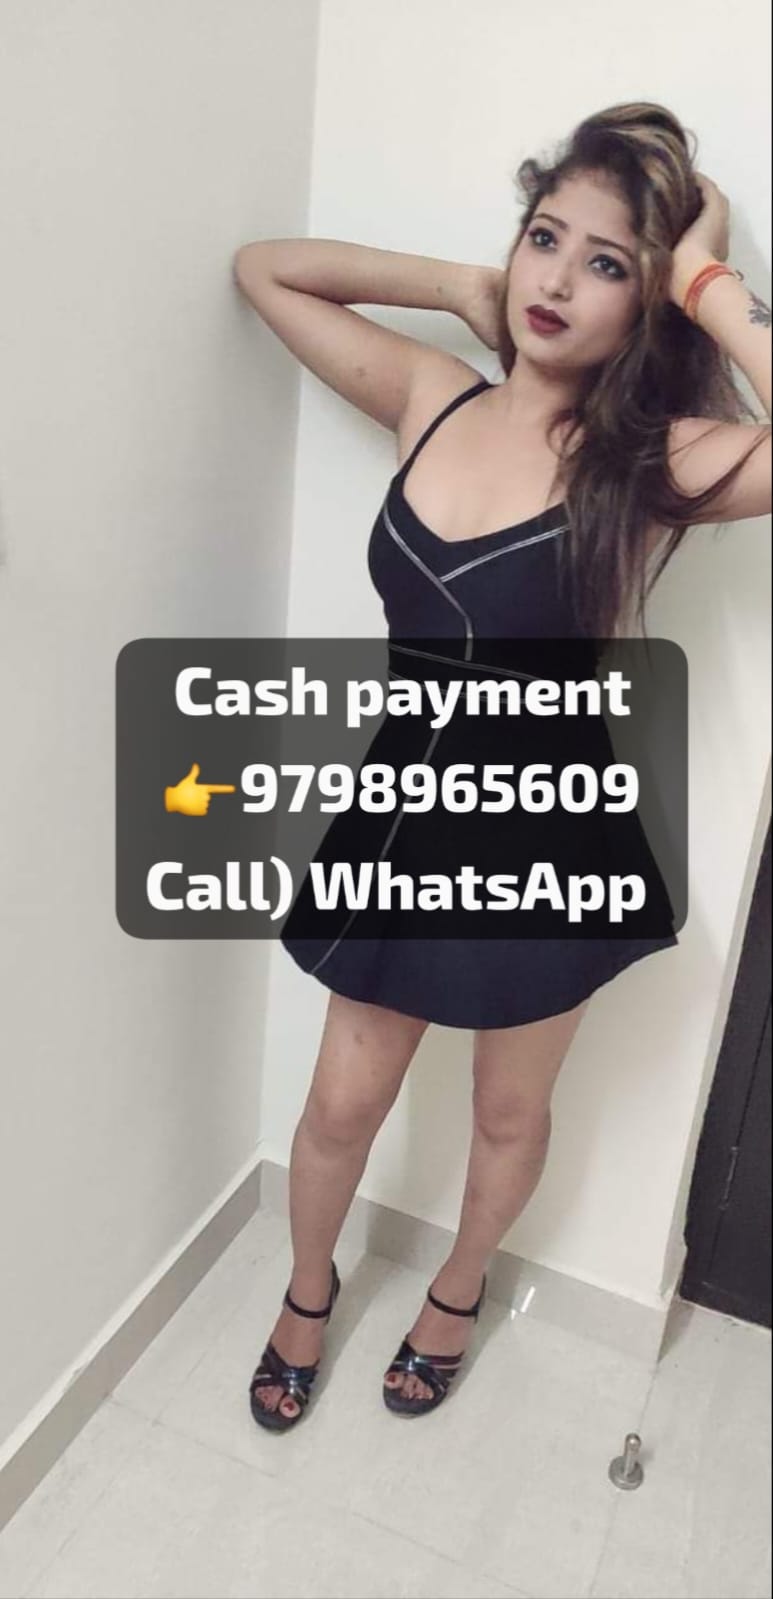 Jalgaon in VIP model college girl available anytime 